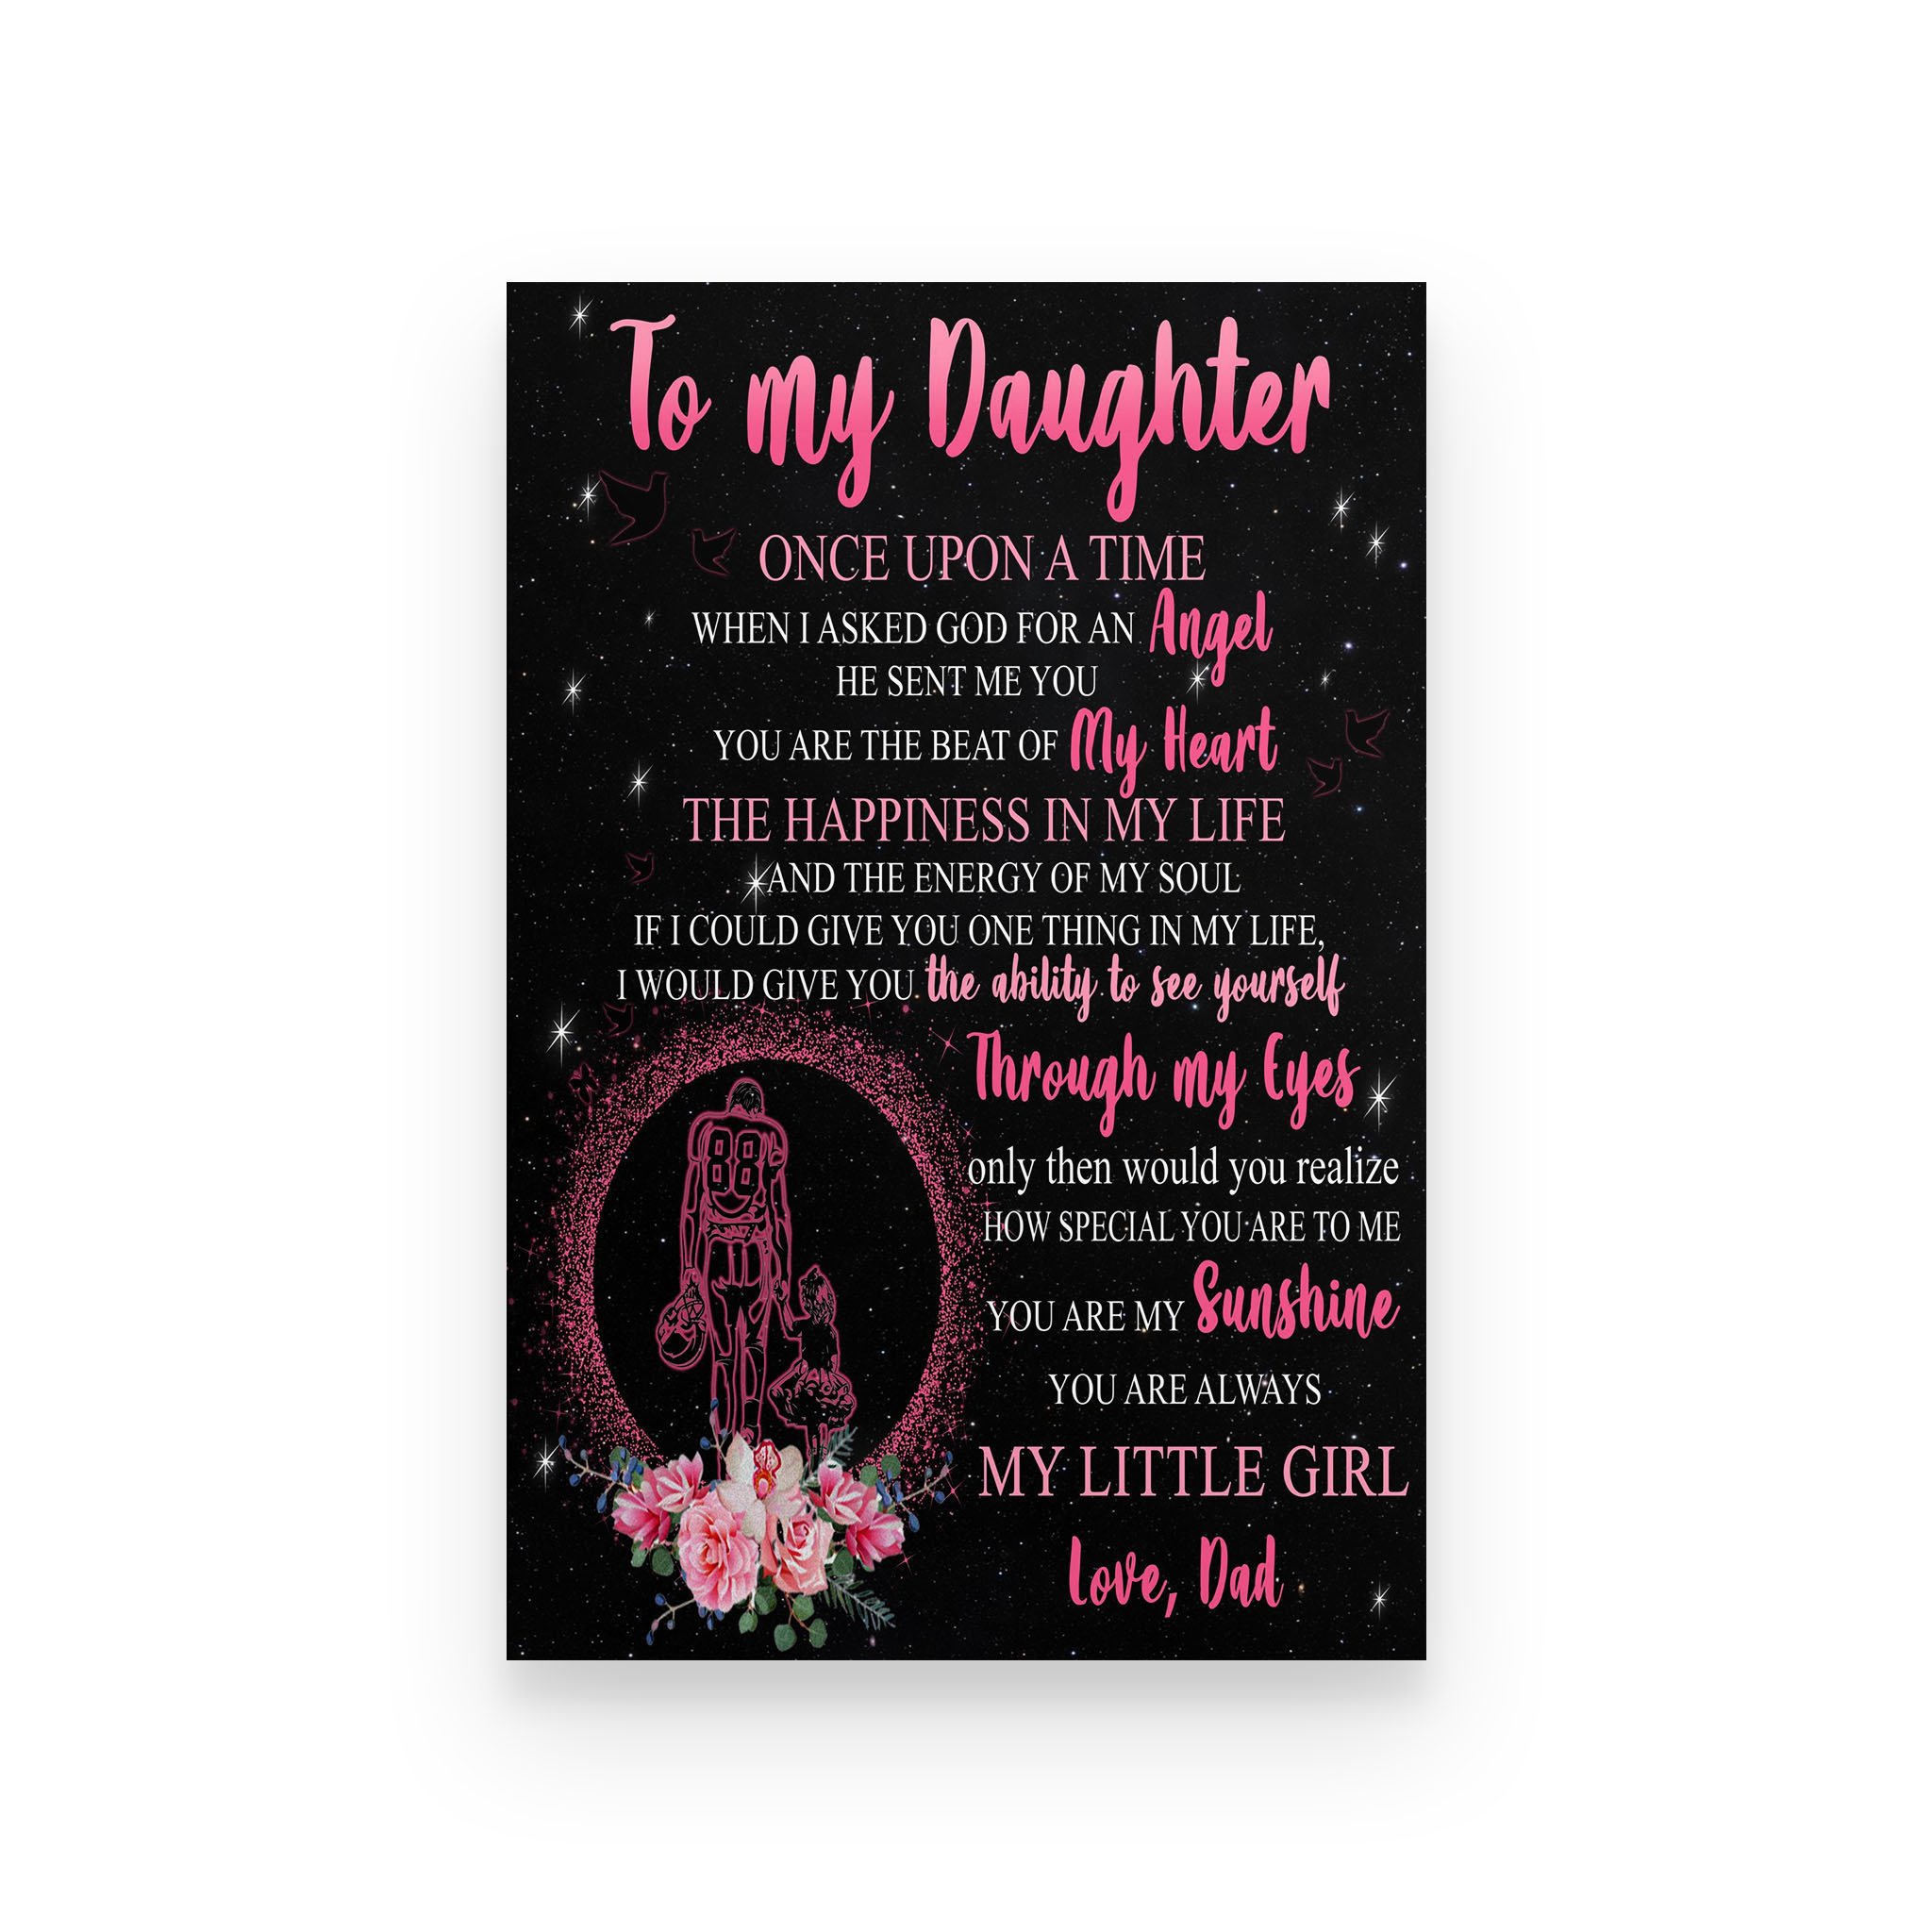 American football poster dad to daughter once upon a time